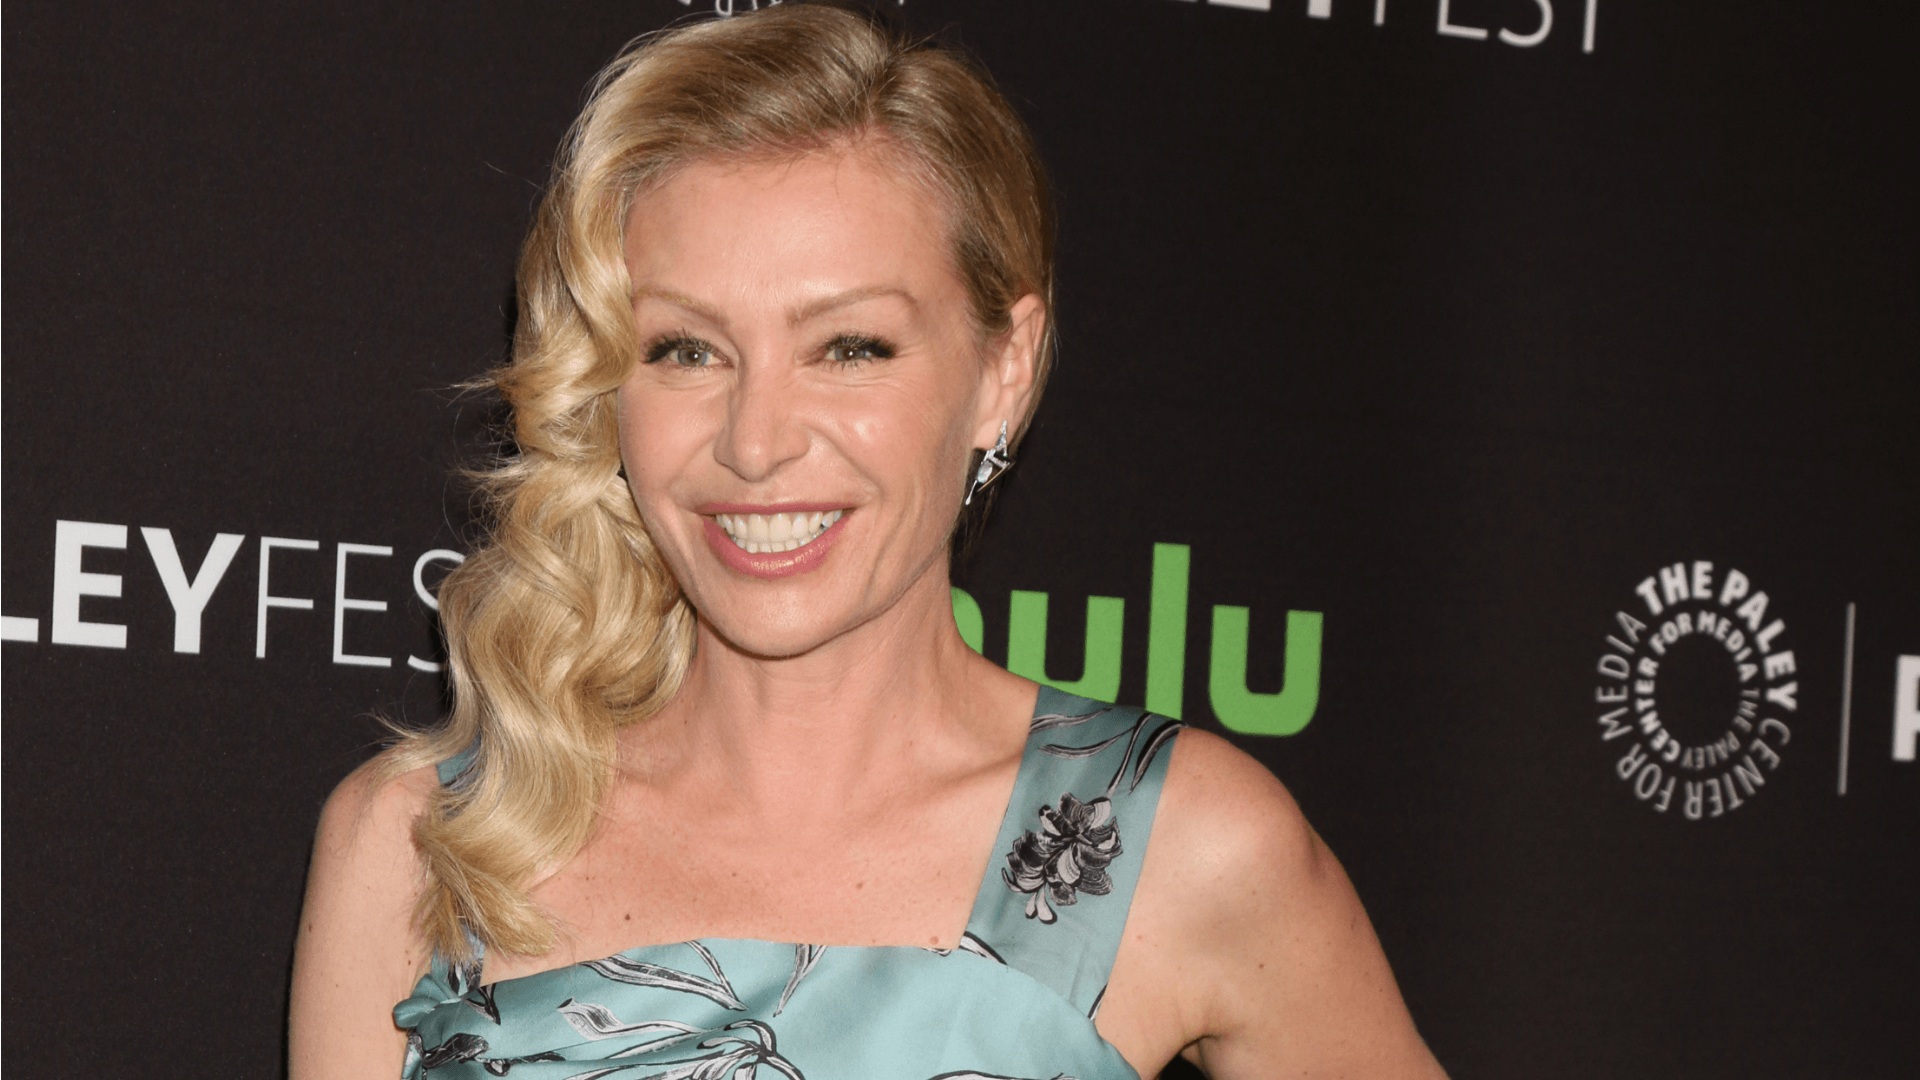 Portia de Rossi's thin appearance mocked with hateful comments.